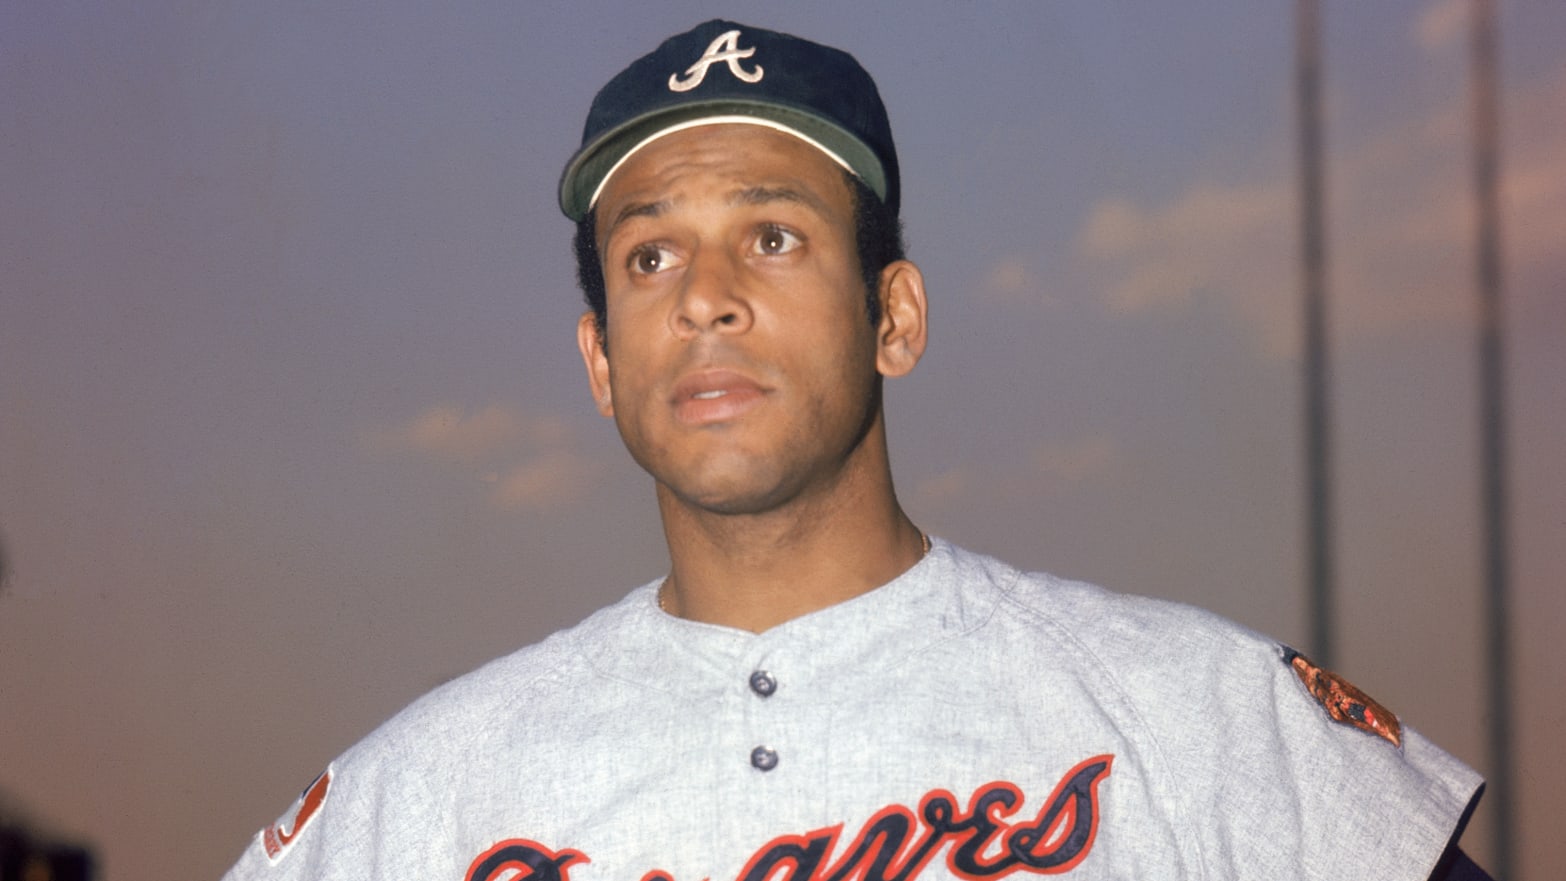 Orlando Cepeda, seen here during his time with the Atlanta Braves.